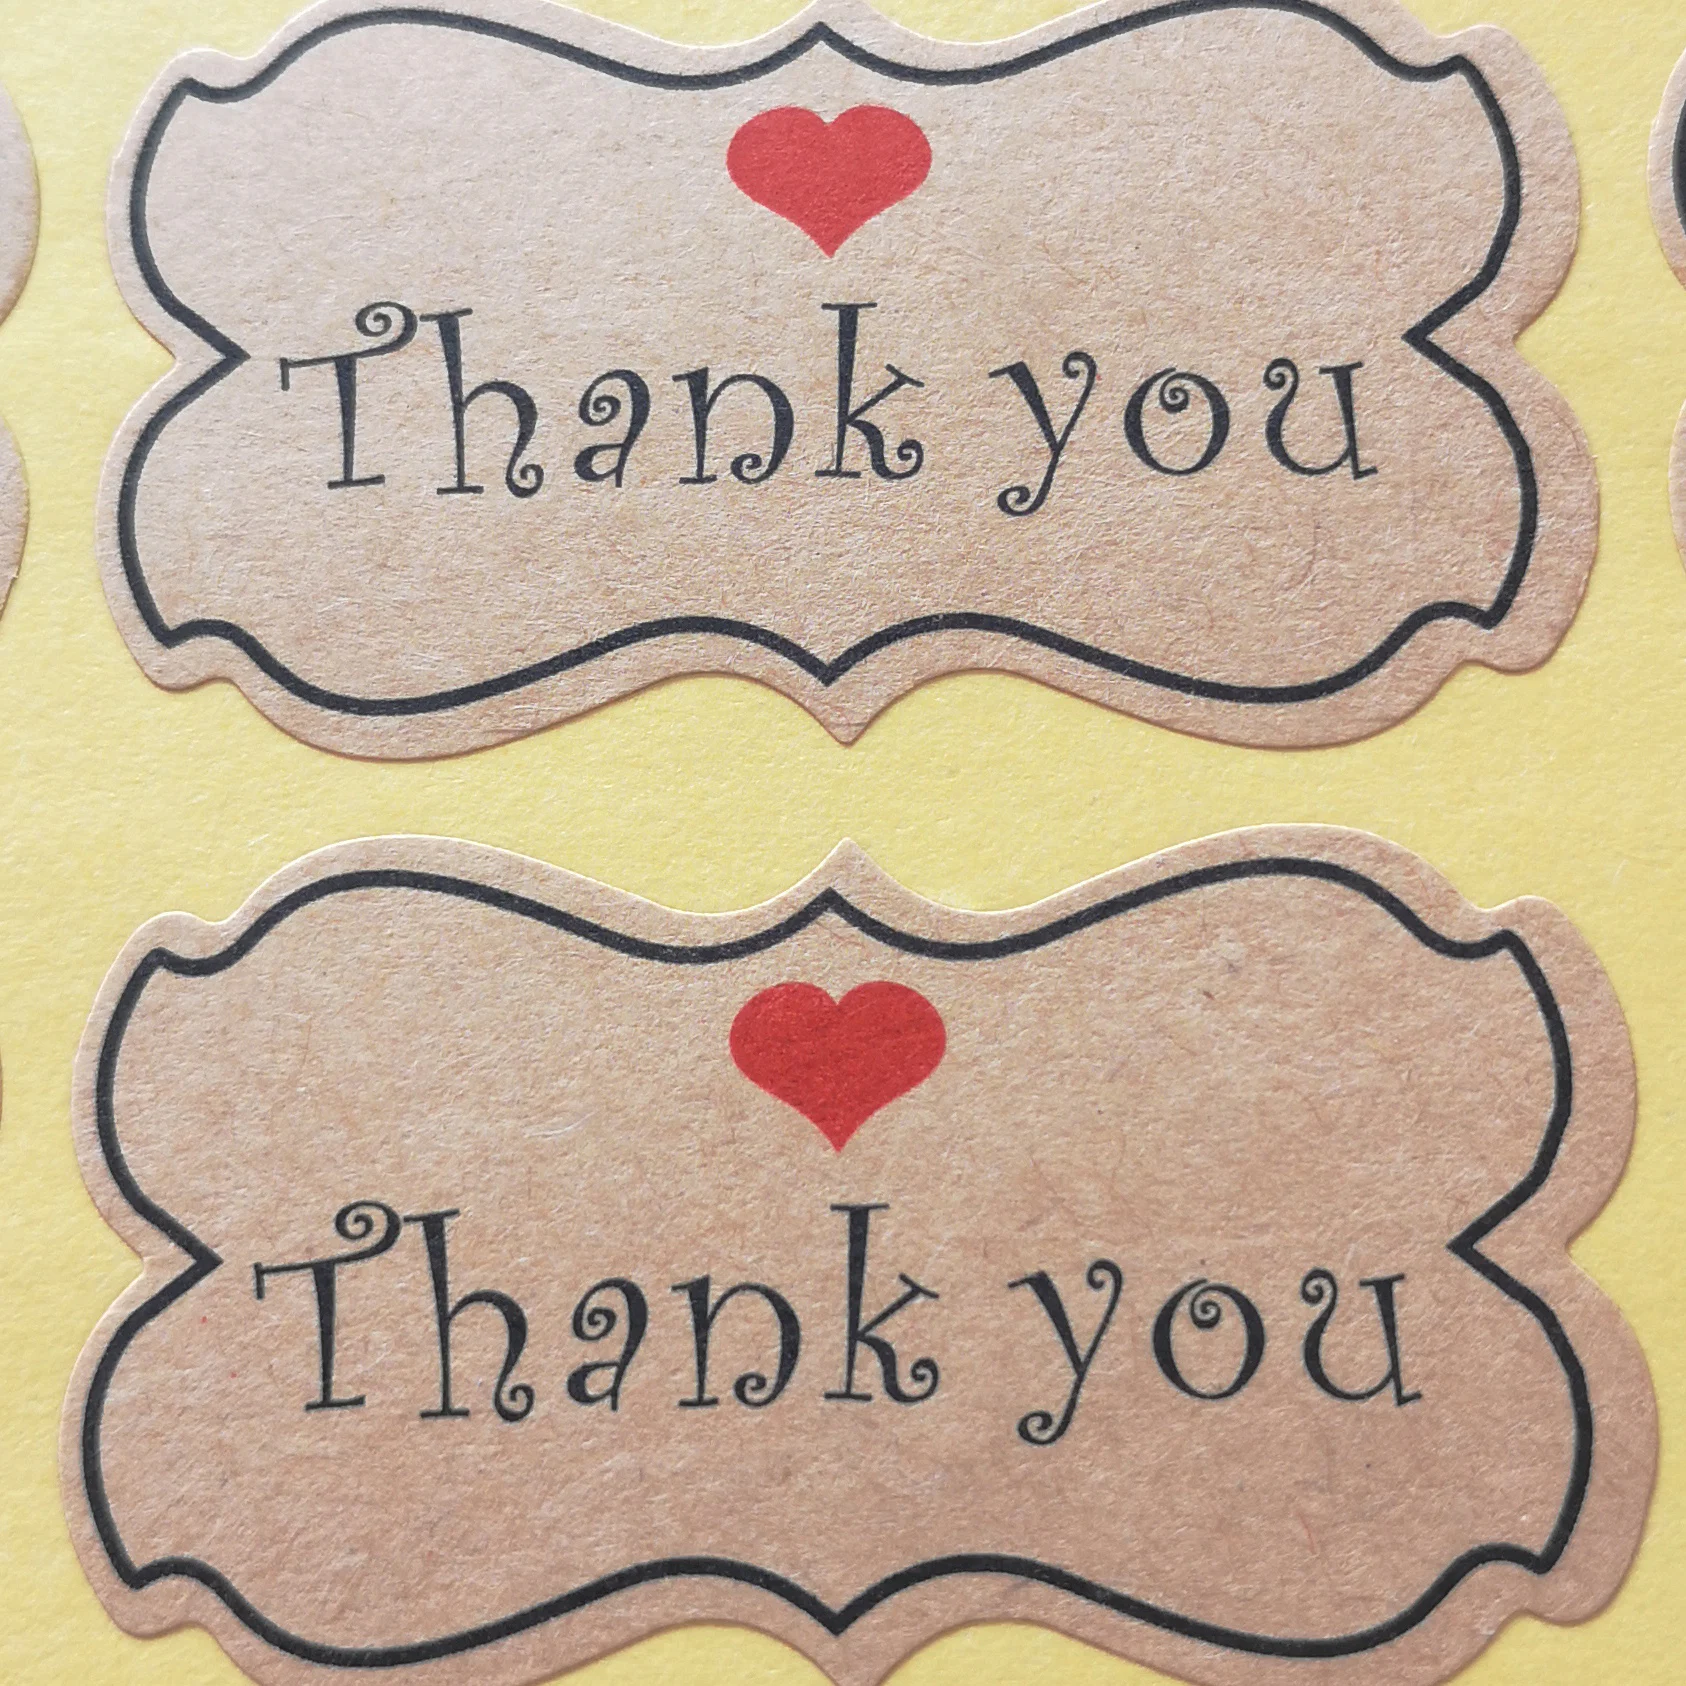 360 stickers/lot 32x58mm THANK YOU Self-adhesive kraft paper sealing label sticker for packing, Item No.TK33